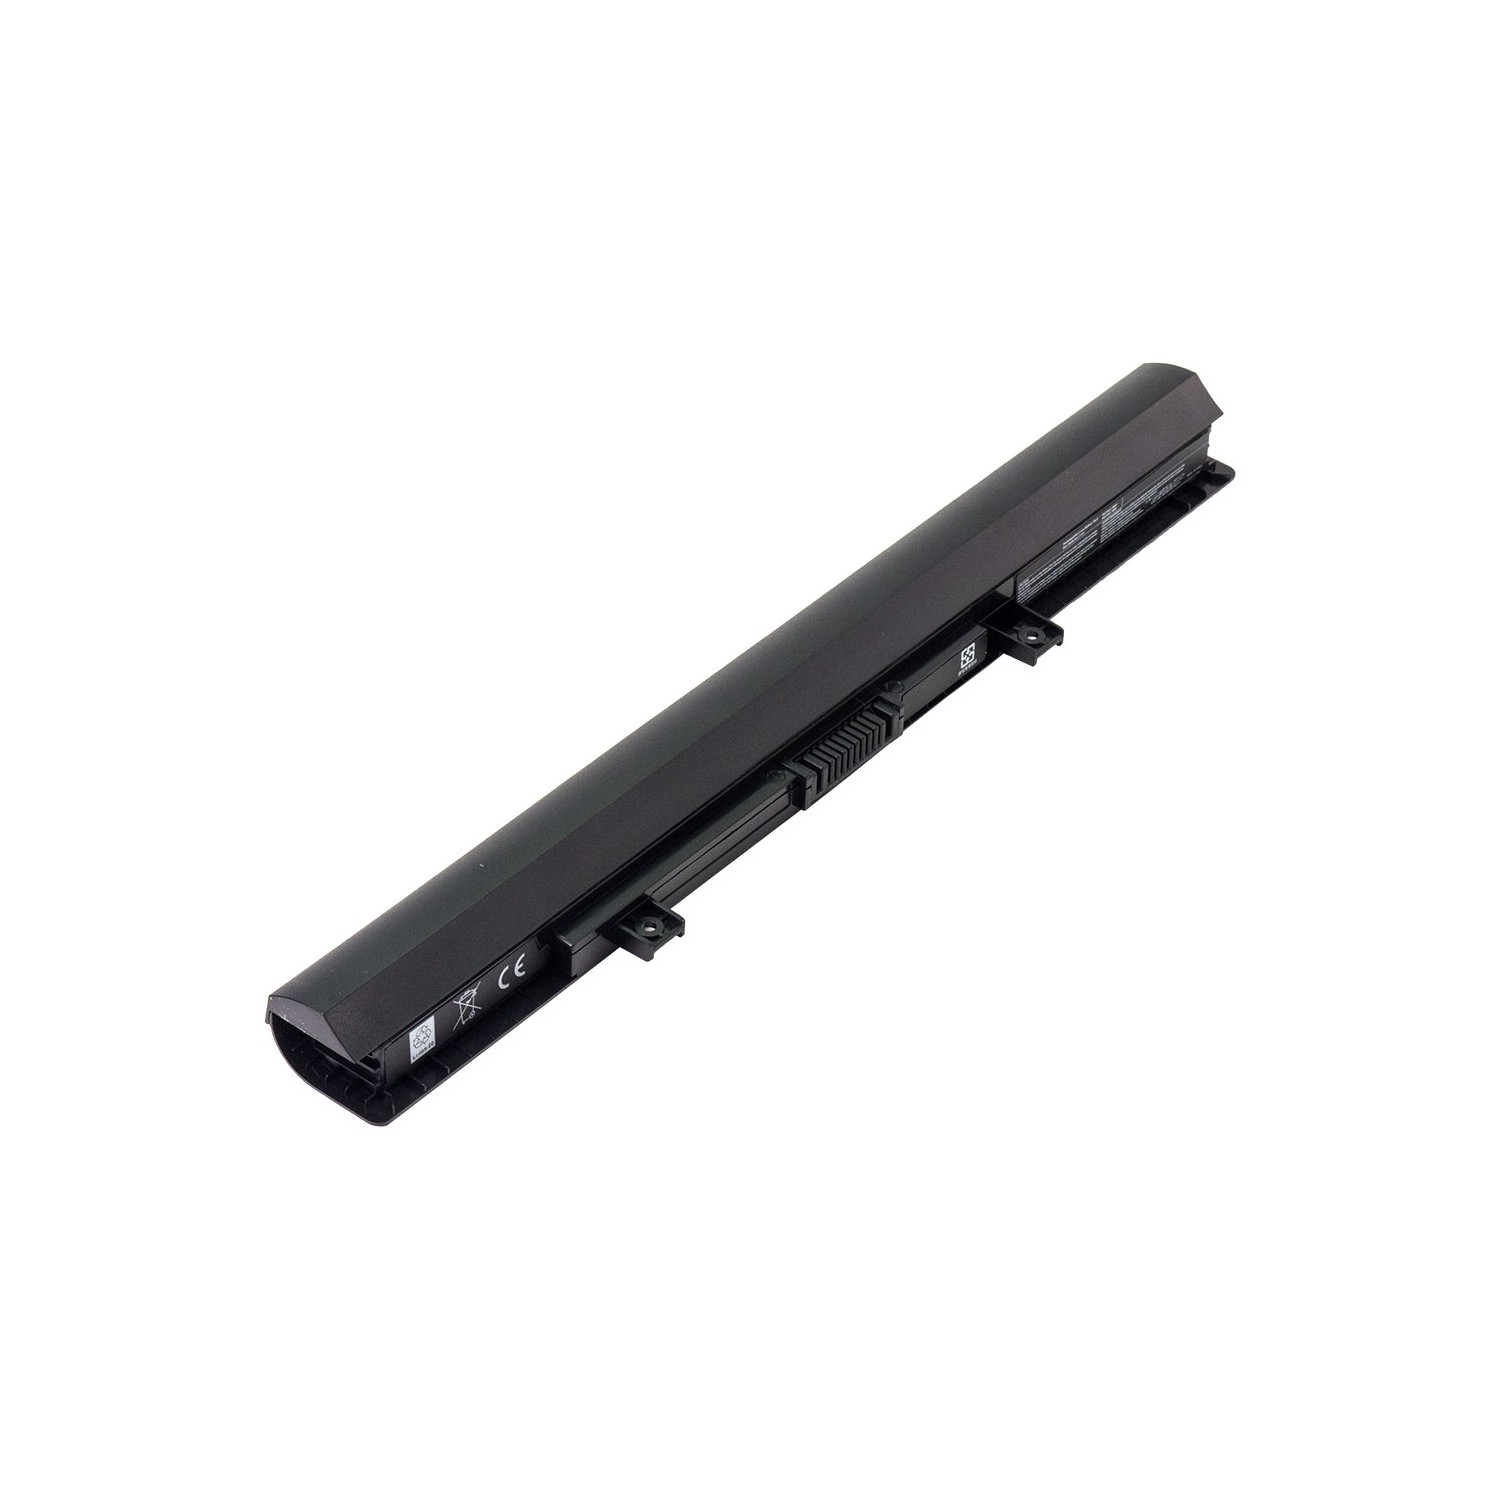 Laptop Battery Replacement for Toshiba Satellite C50-B, PA5184U-1BRS, PA5185U, PA5185U-1BRS, PA5186U-1BRS, PA5195U-1BRS